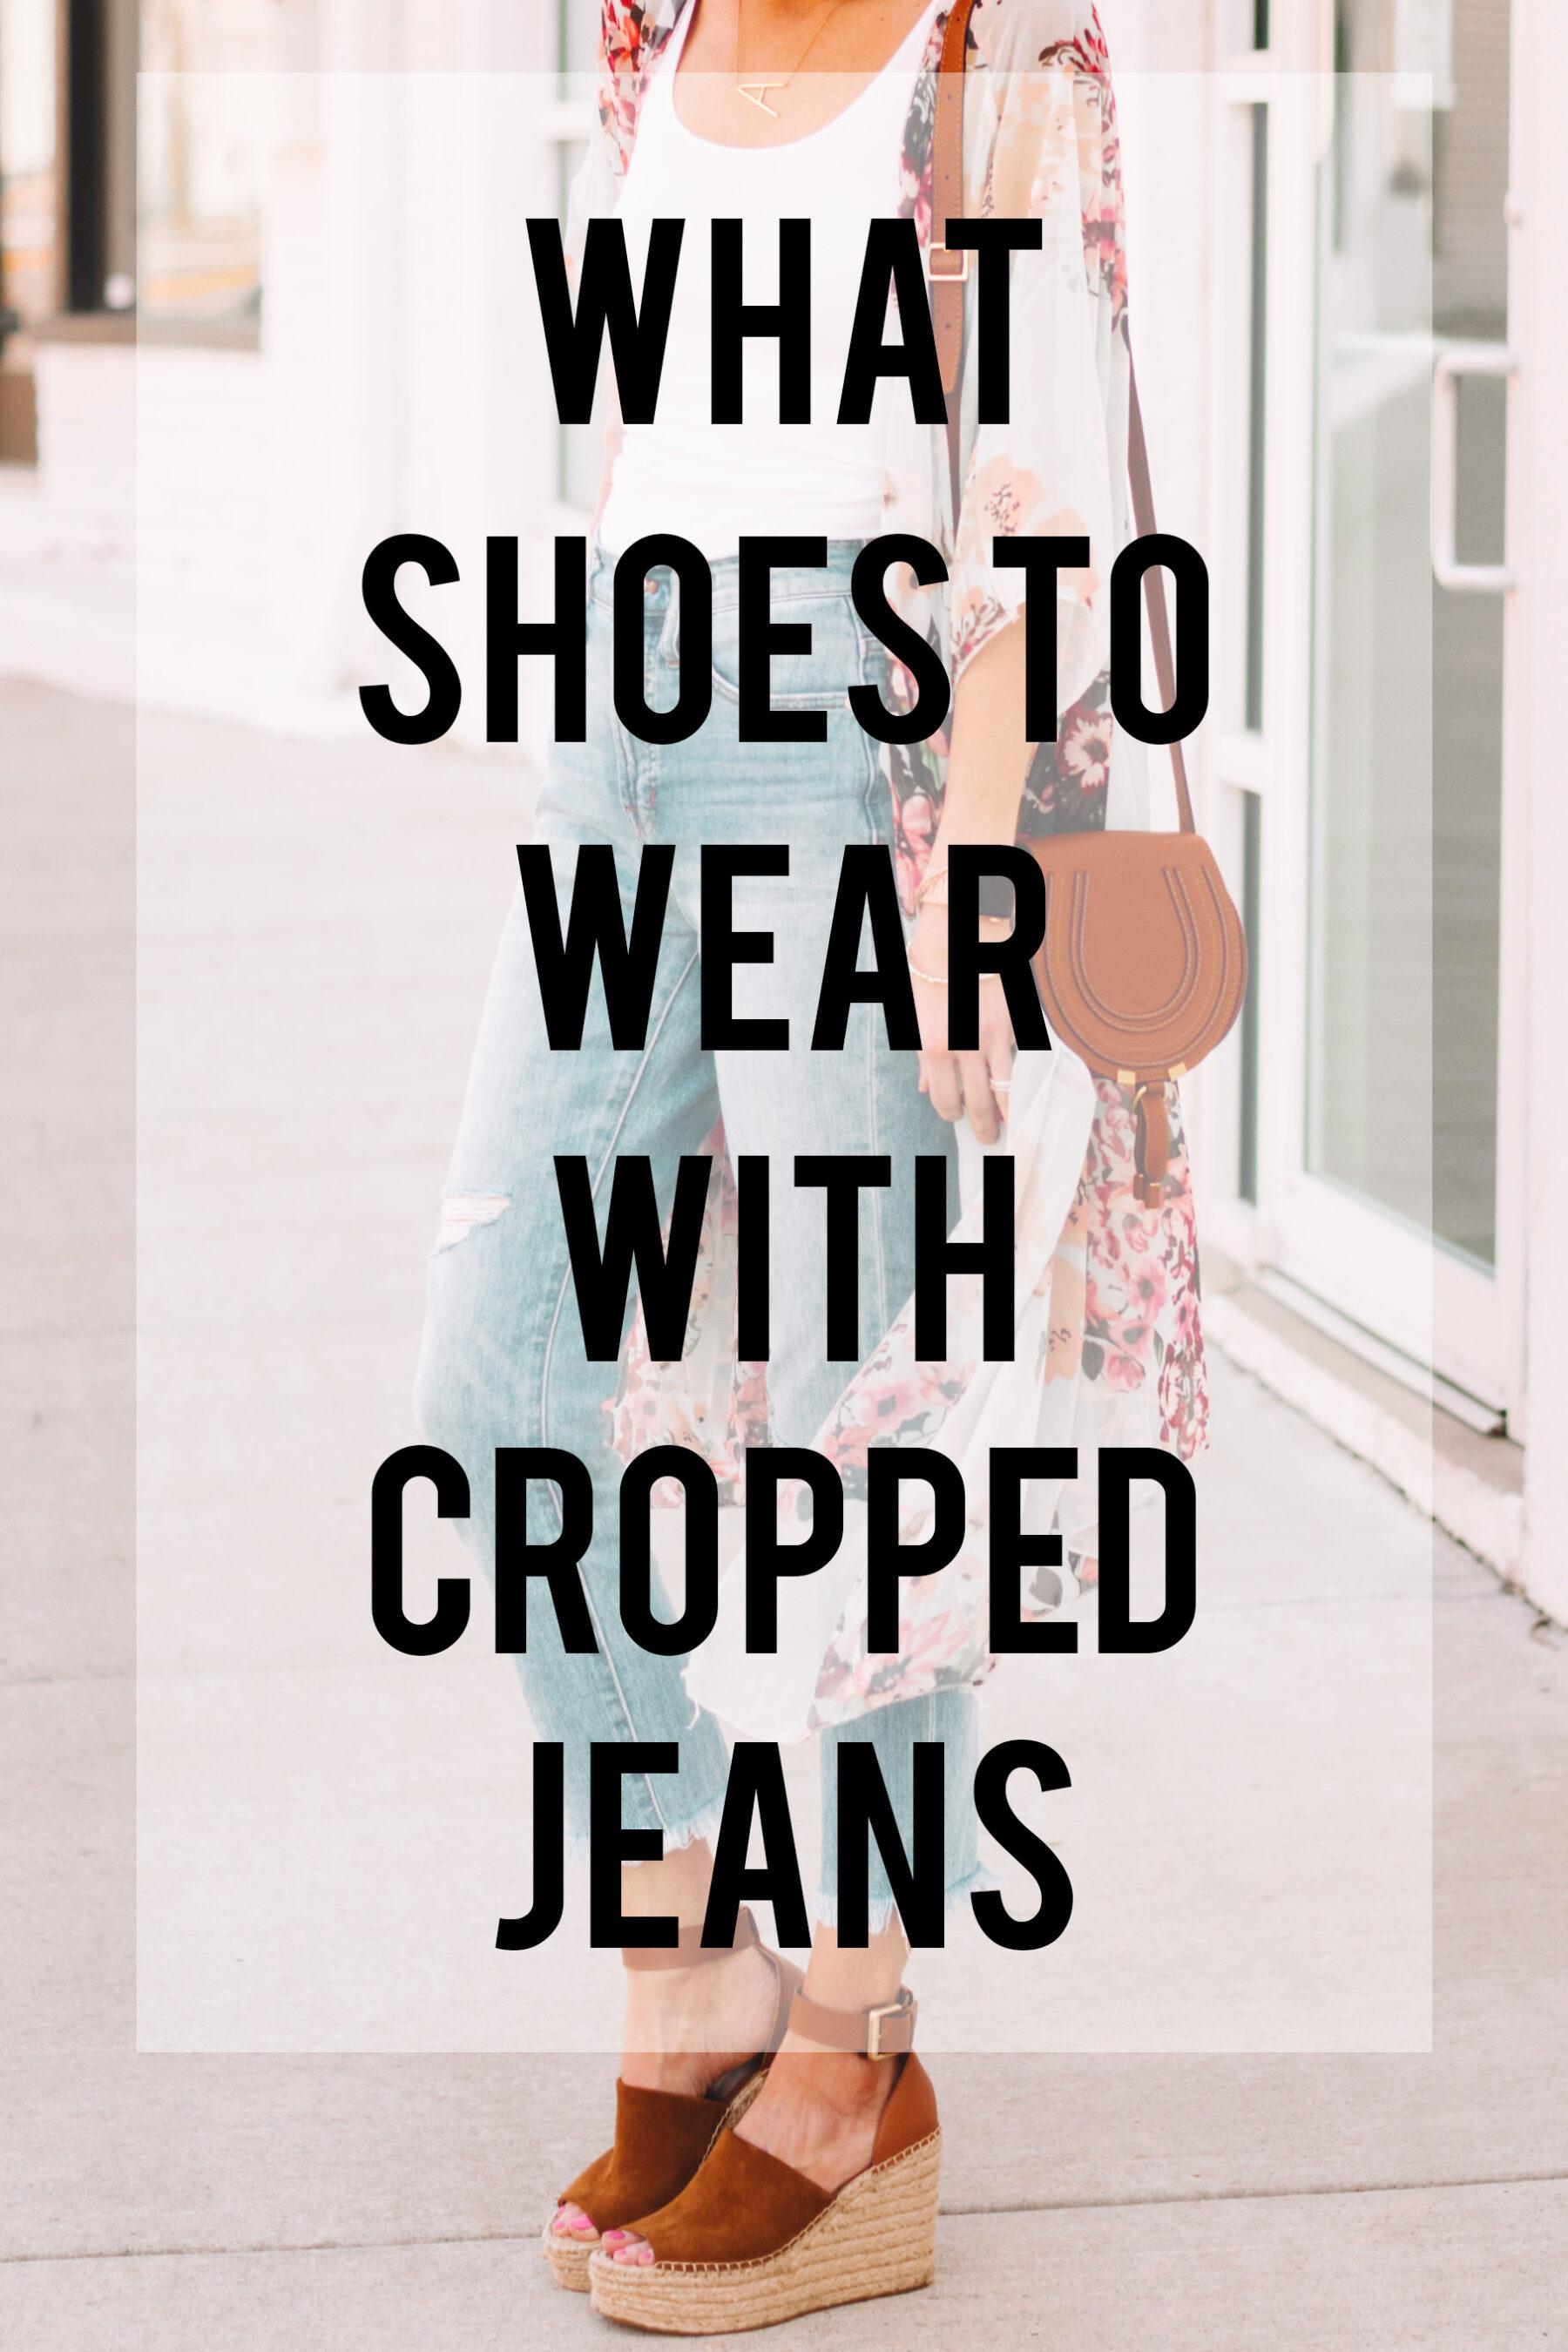 what shoes to wear with cropped jeans, post with all the shoe options you can wear with cropped jeans plus easy dos and don